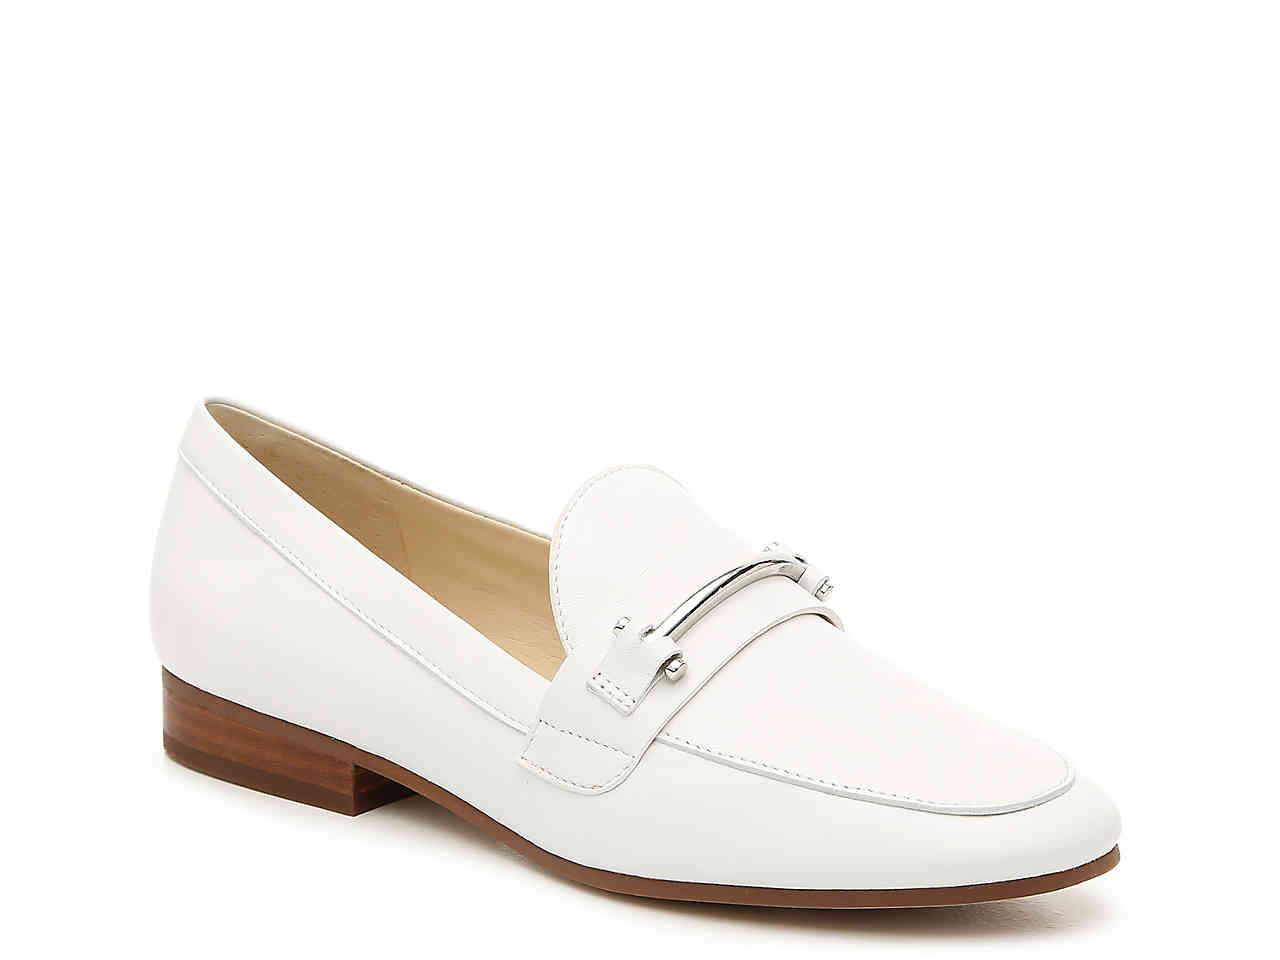 Enzo Angiolini Taiden Loafer in White 